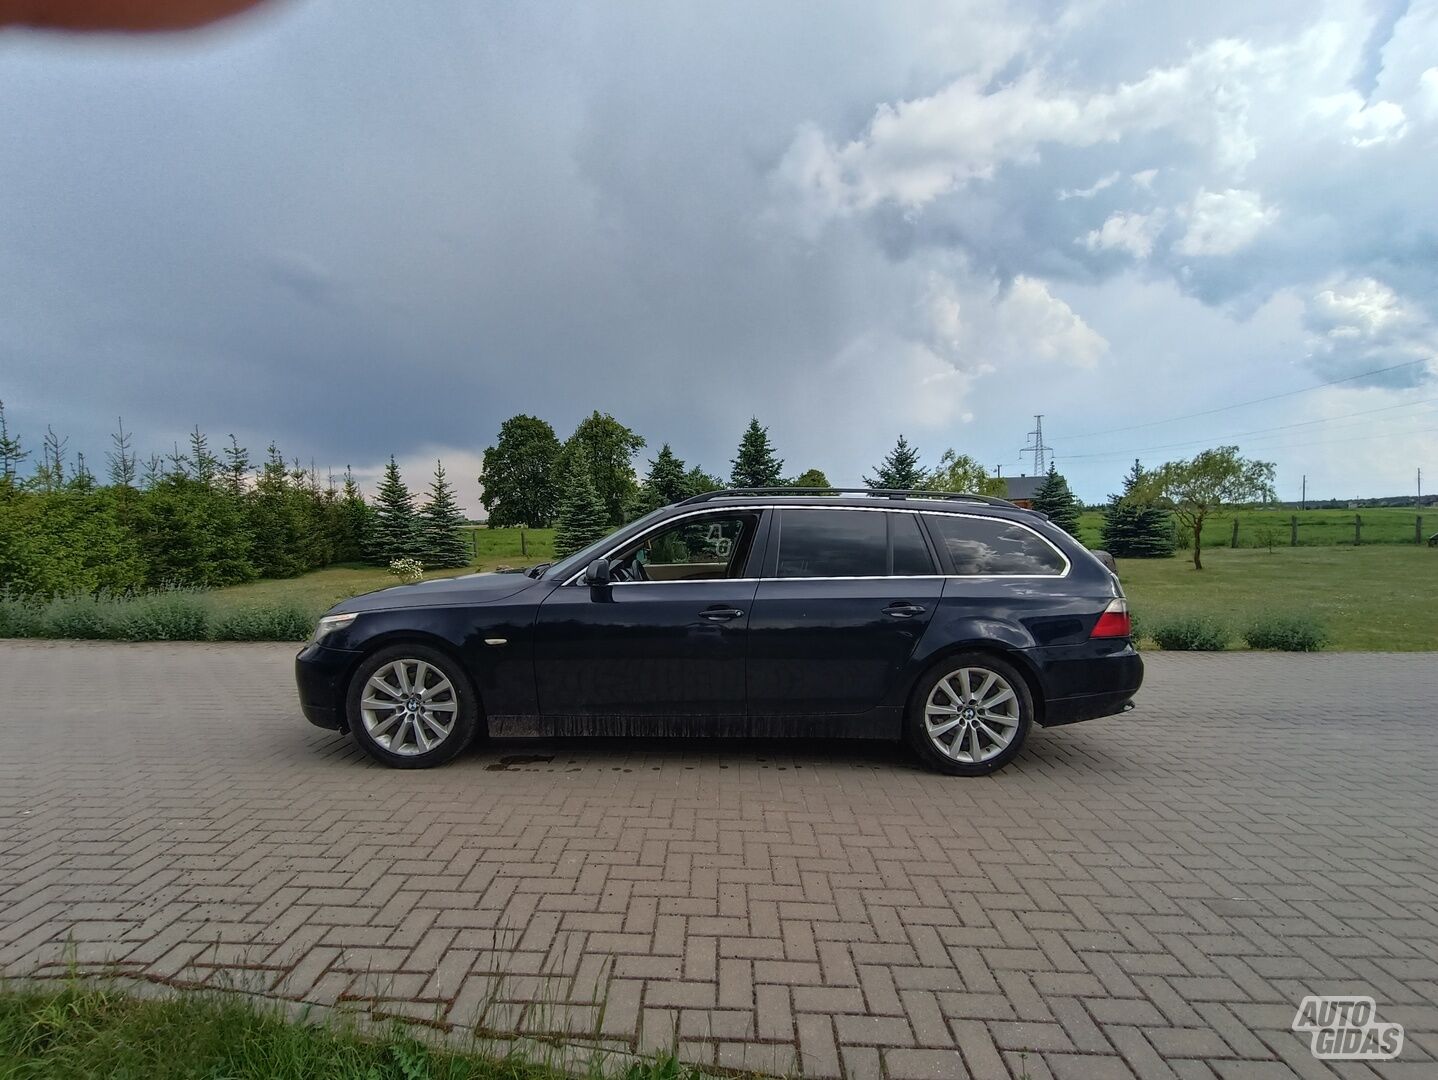 Bmw 525 d Touring 2006 y